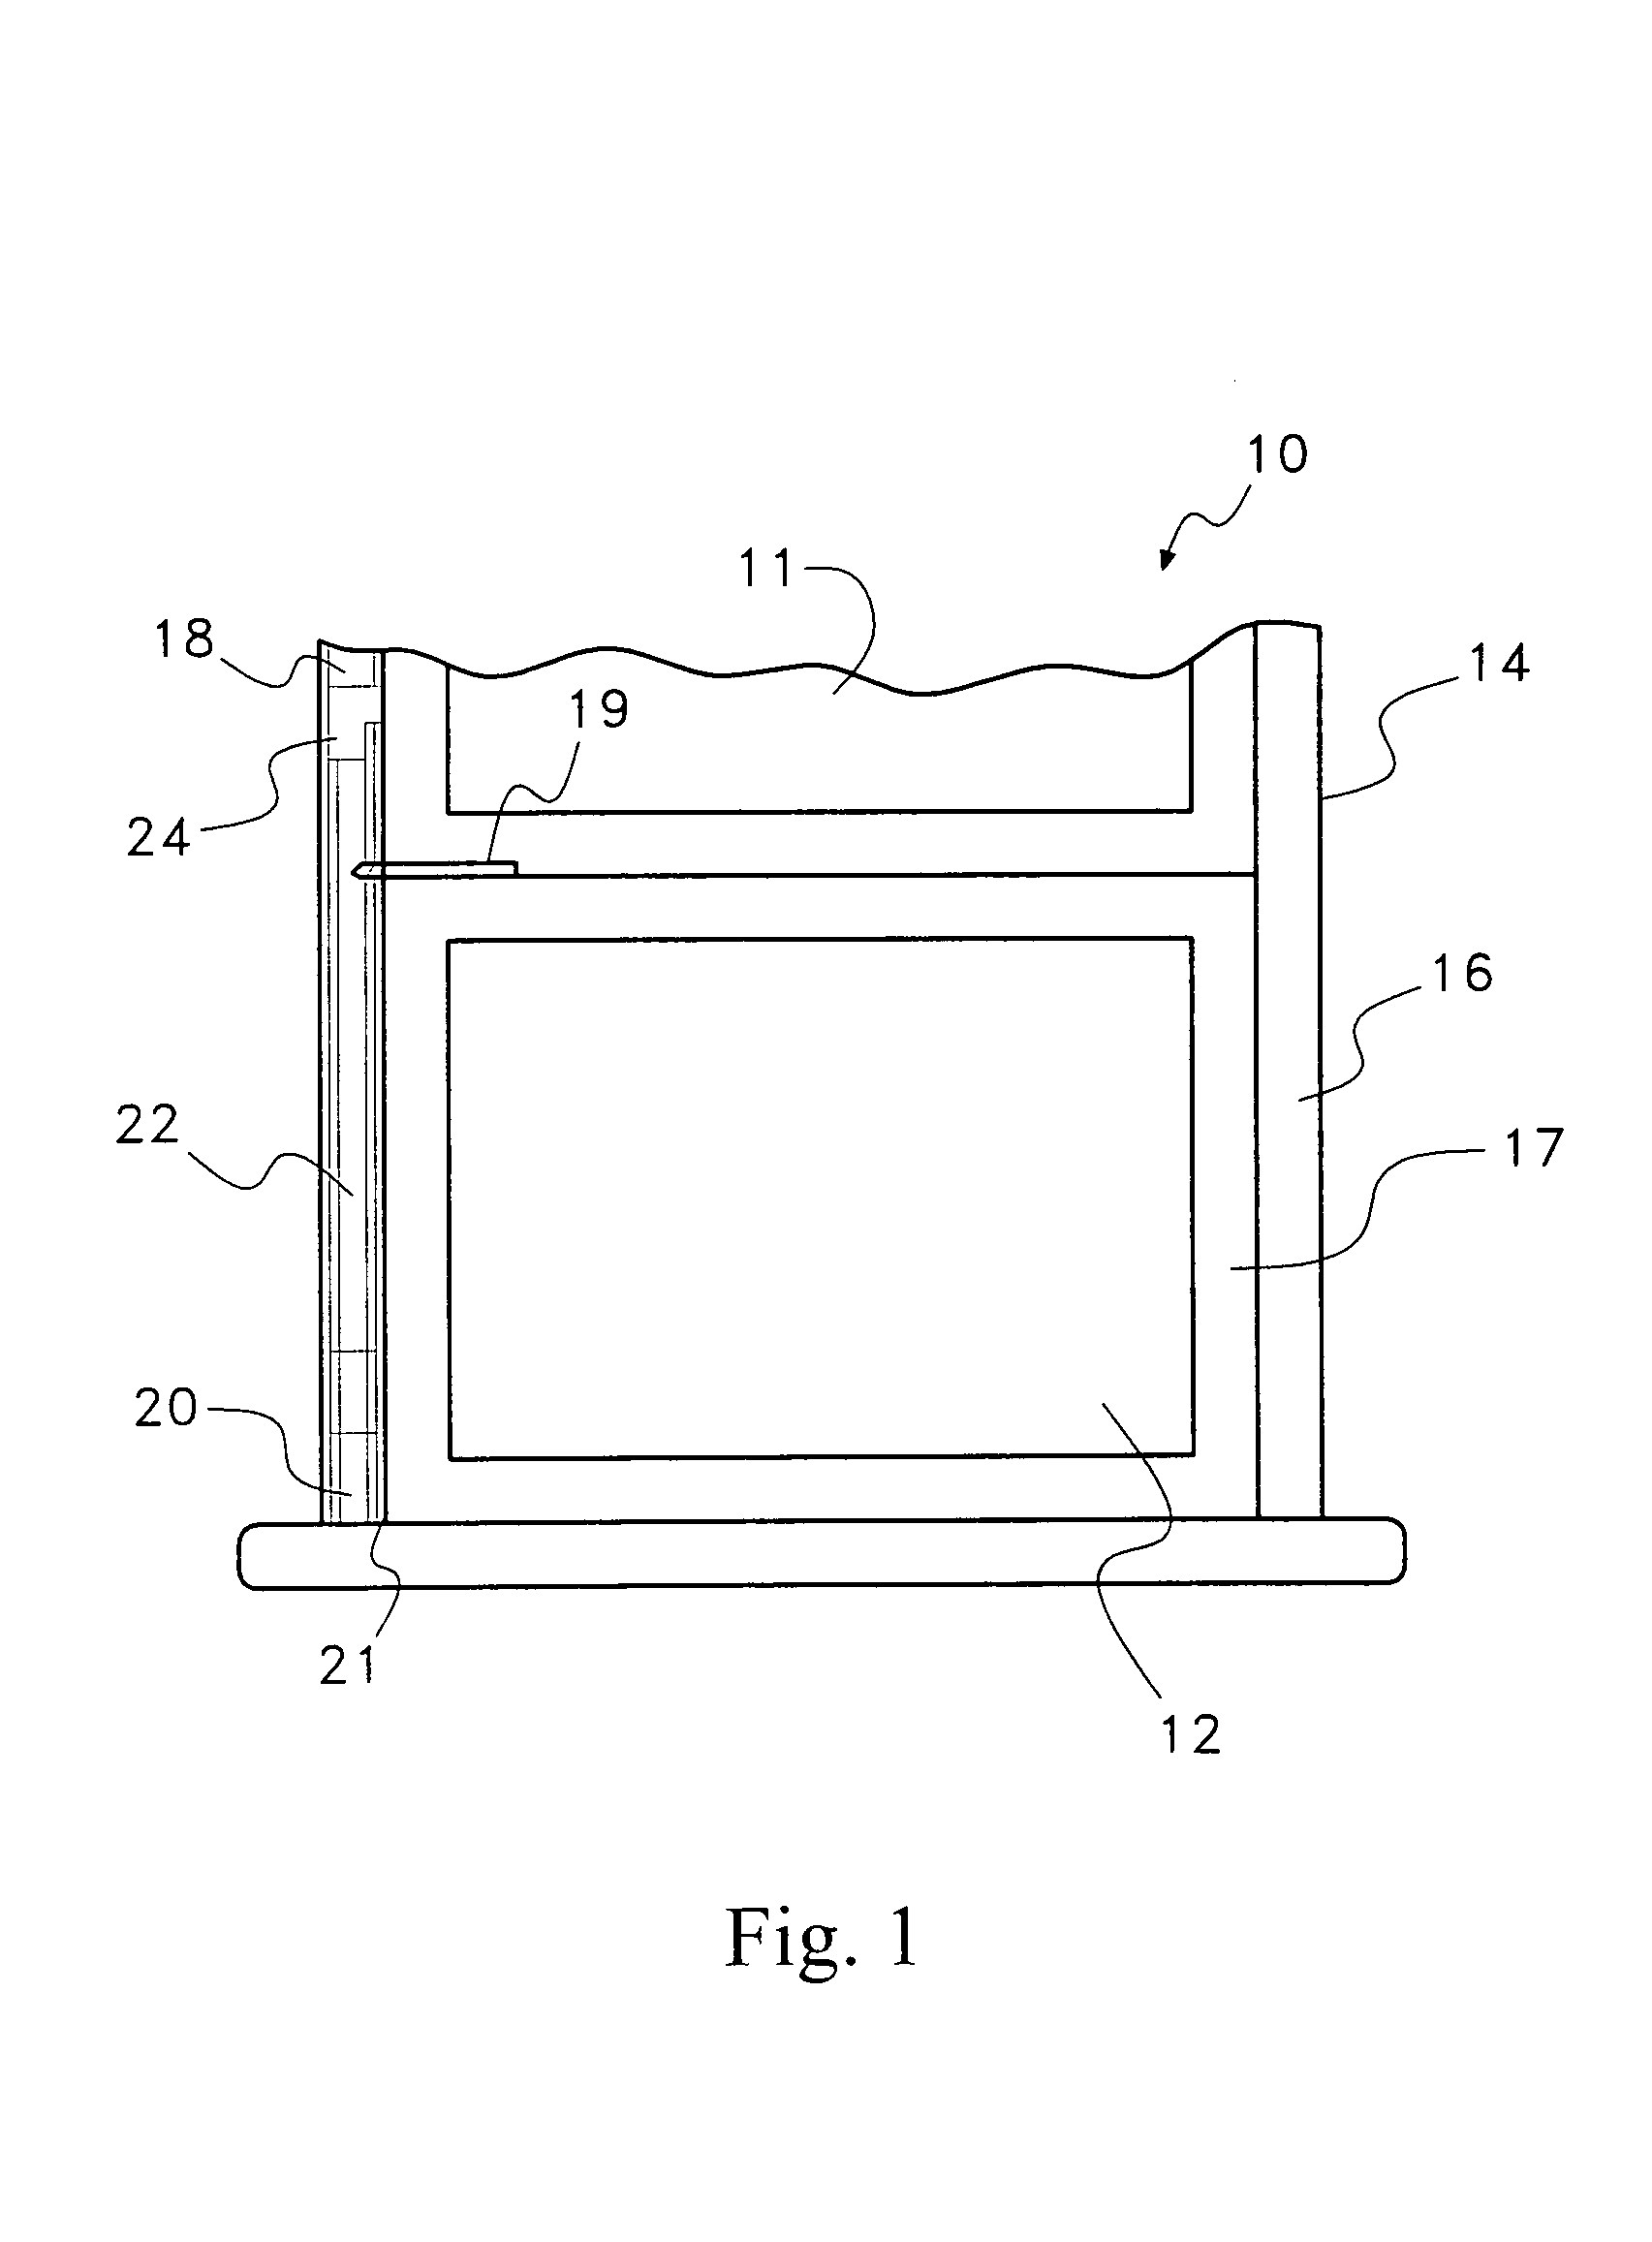 Counterbalance system for a tilt-in window having an improved shoe assembly and anchor mount